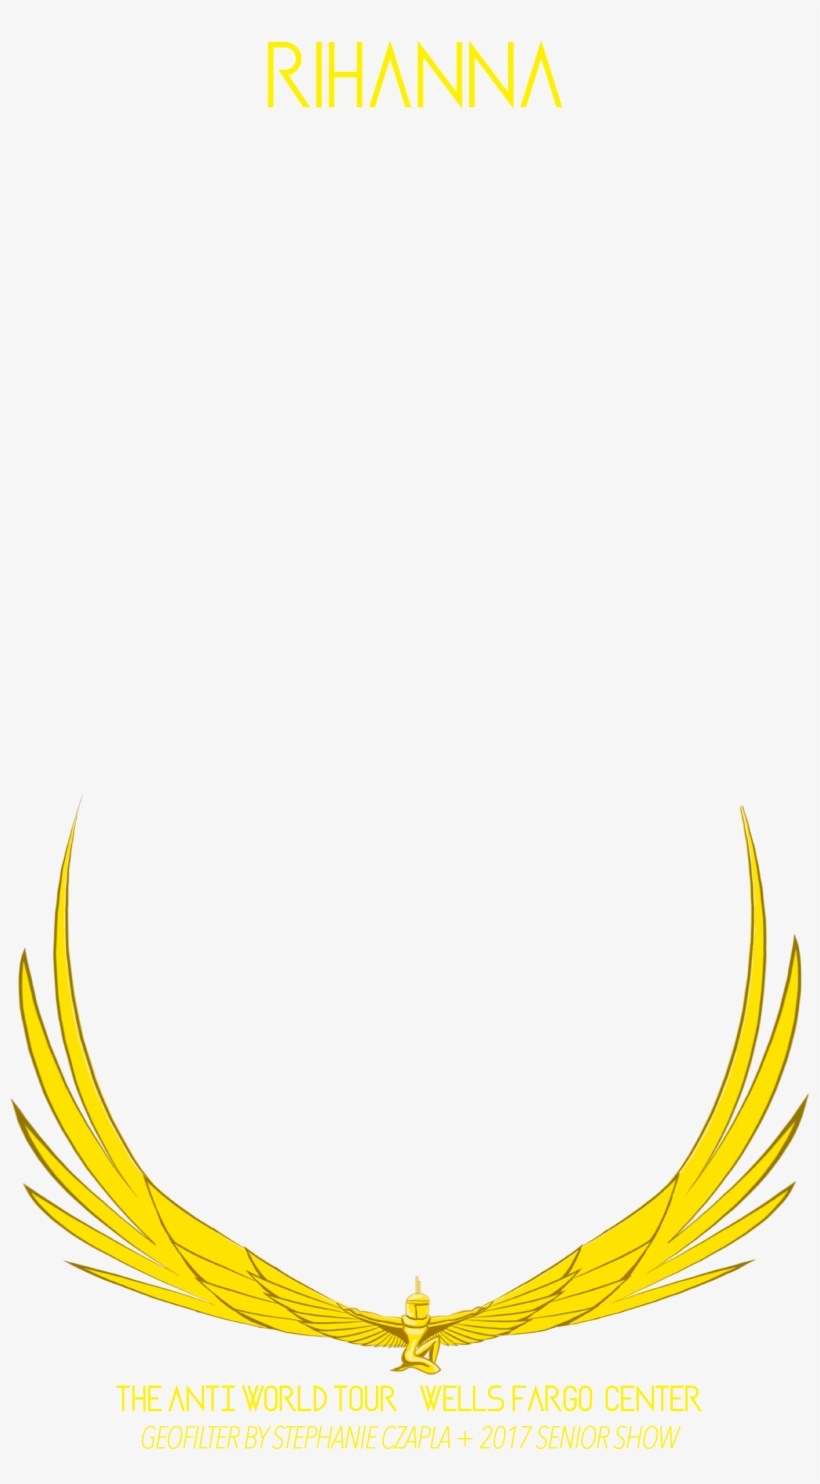 Snapchat Geofilter Accompanying My Concept Concert, transparent png #5320098